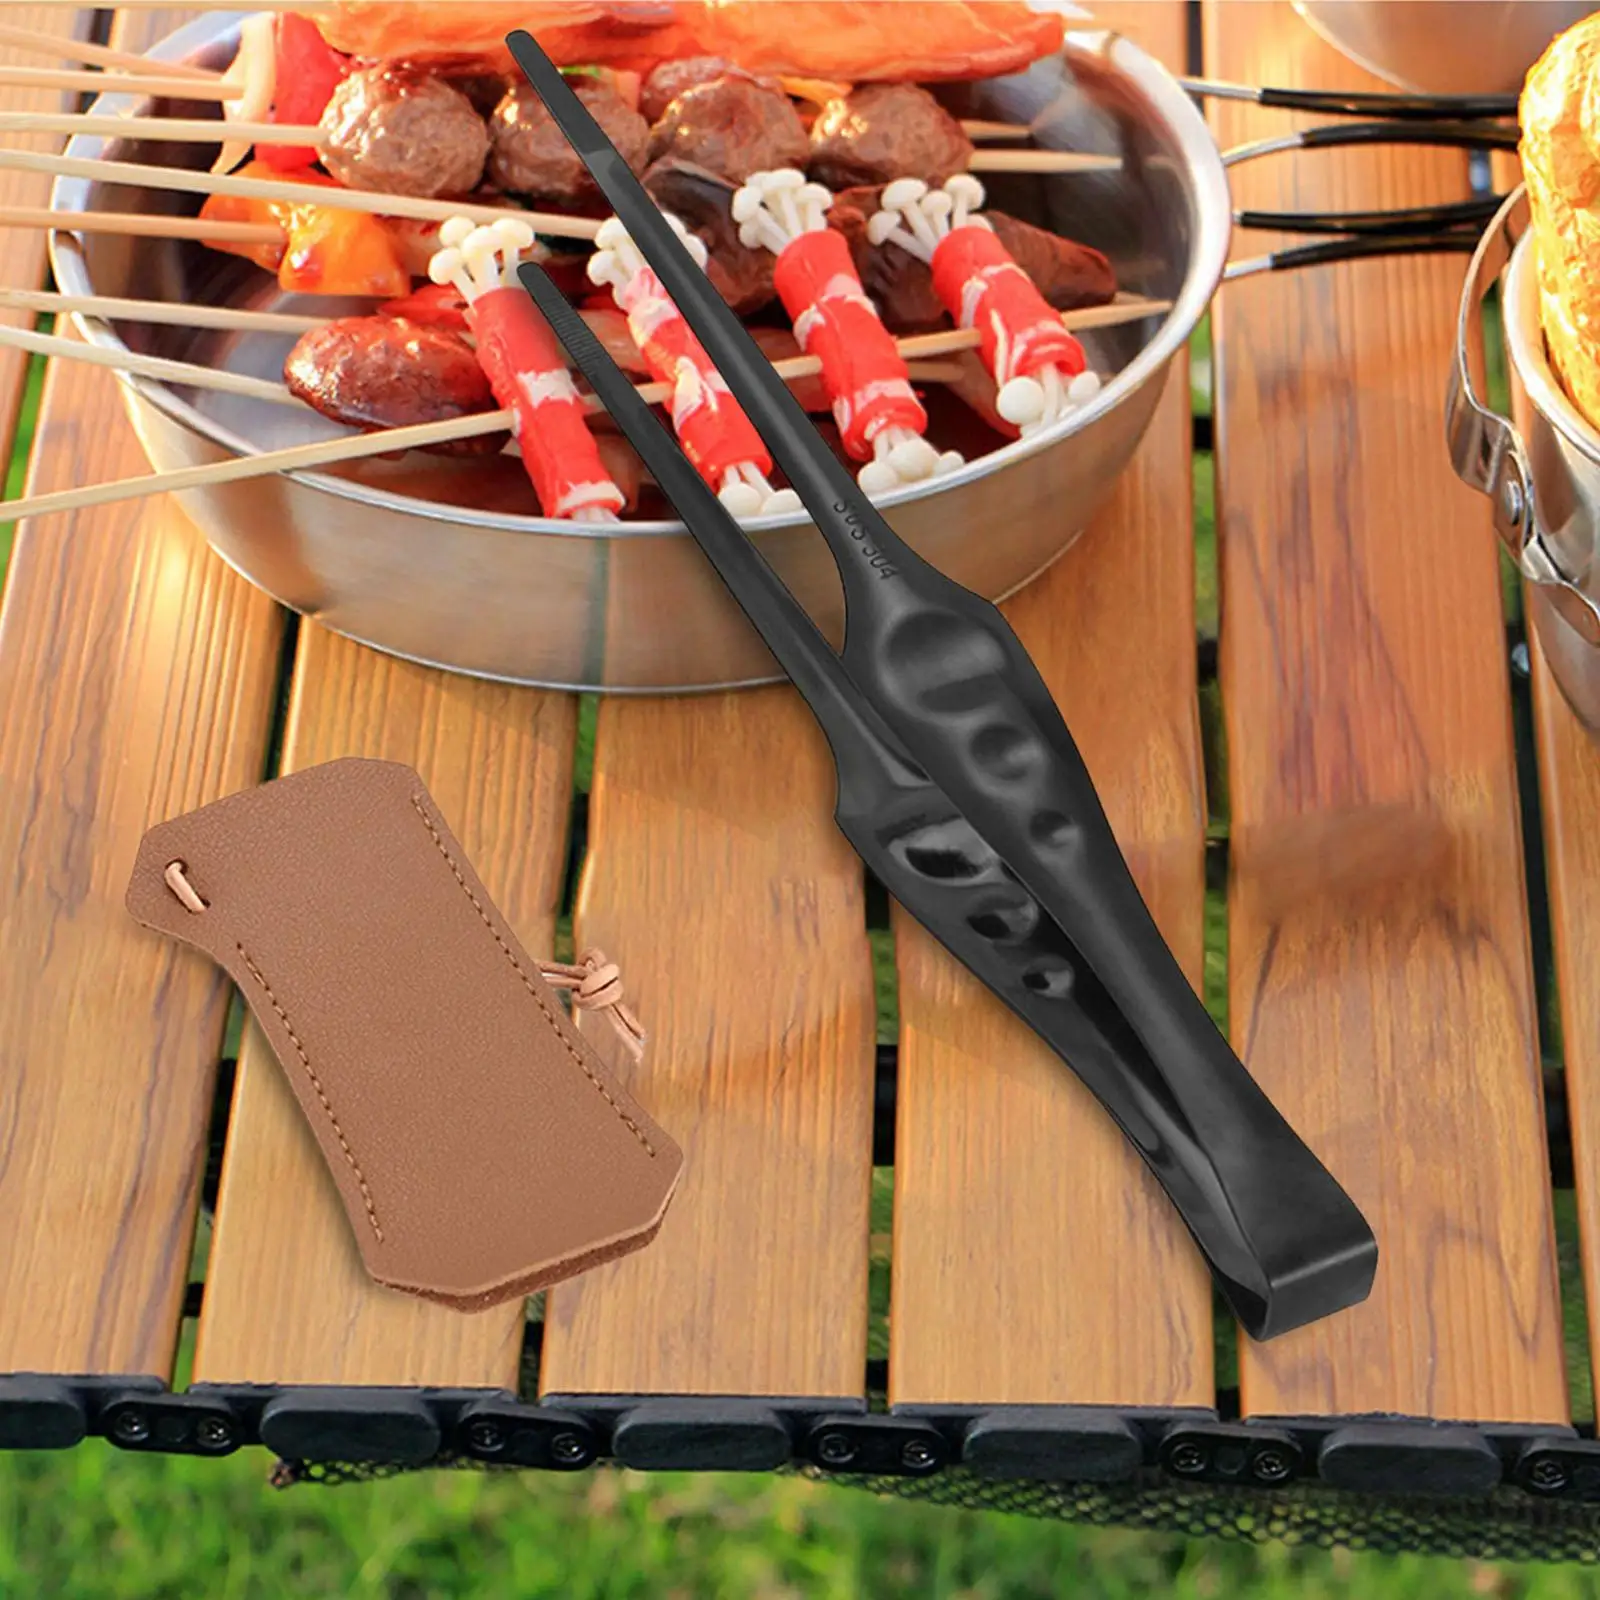 Kitchen Tongs Long Barbecue Serving Utensils Catering Tools Nonslip Grip